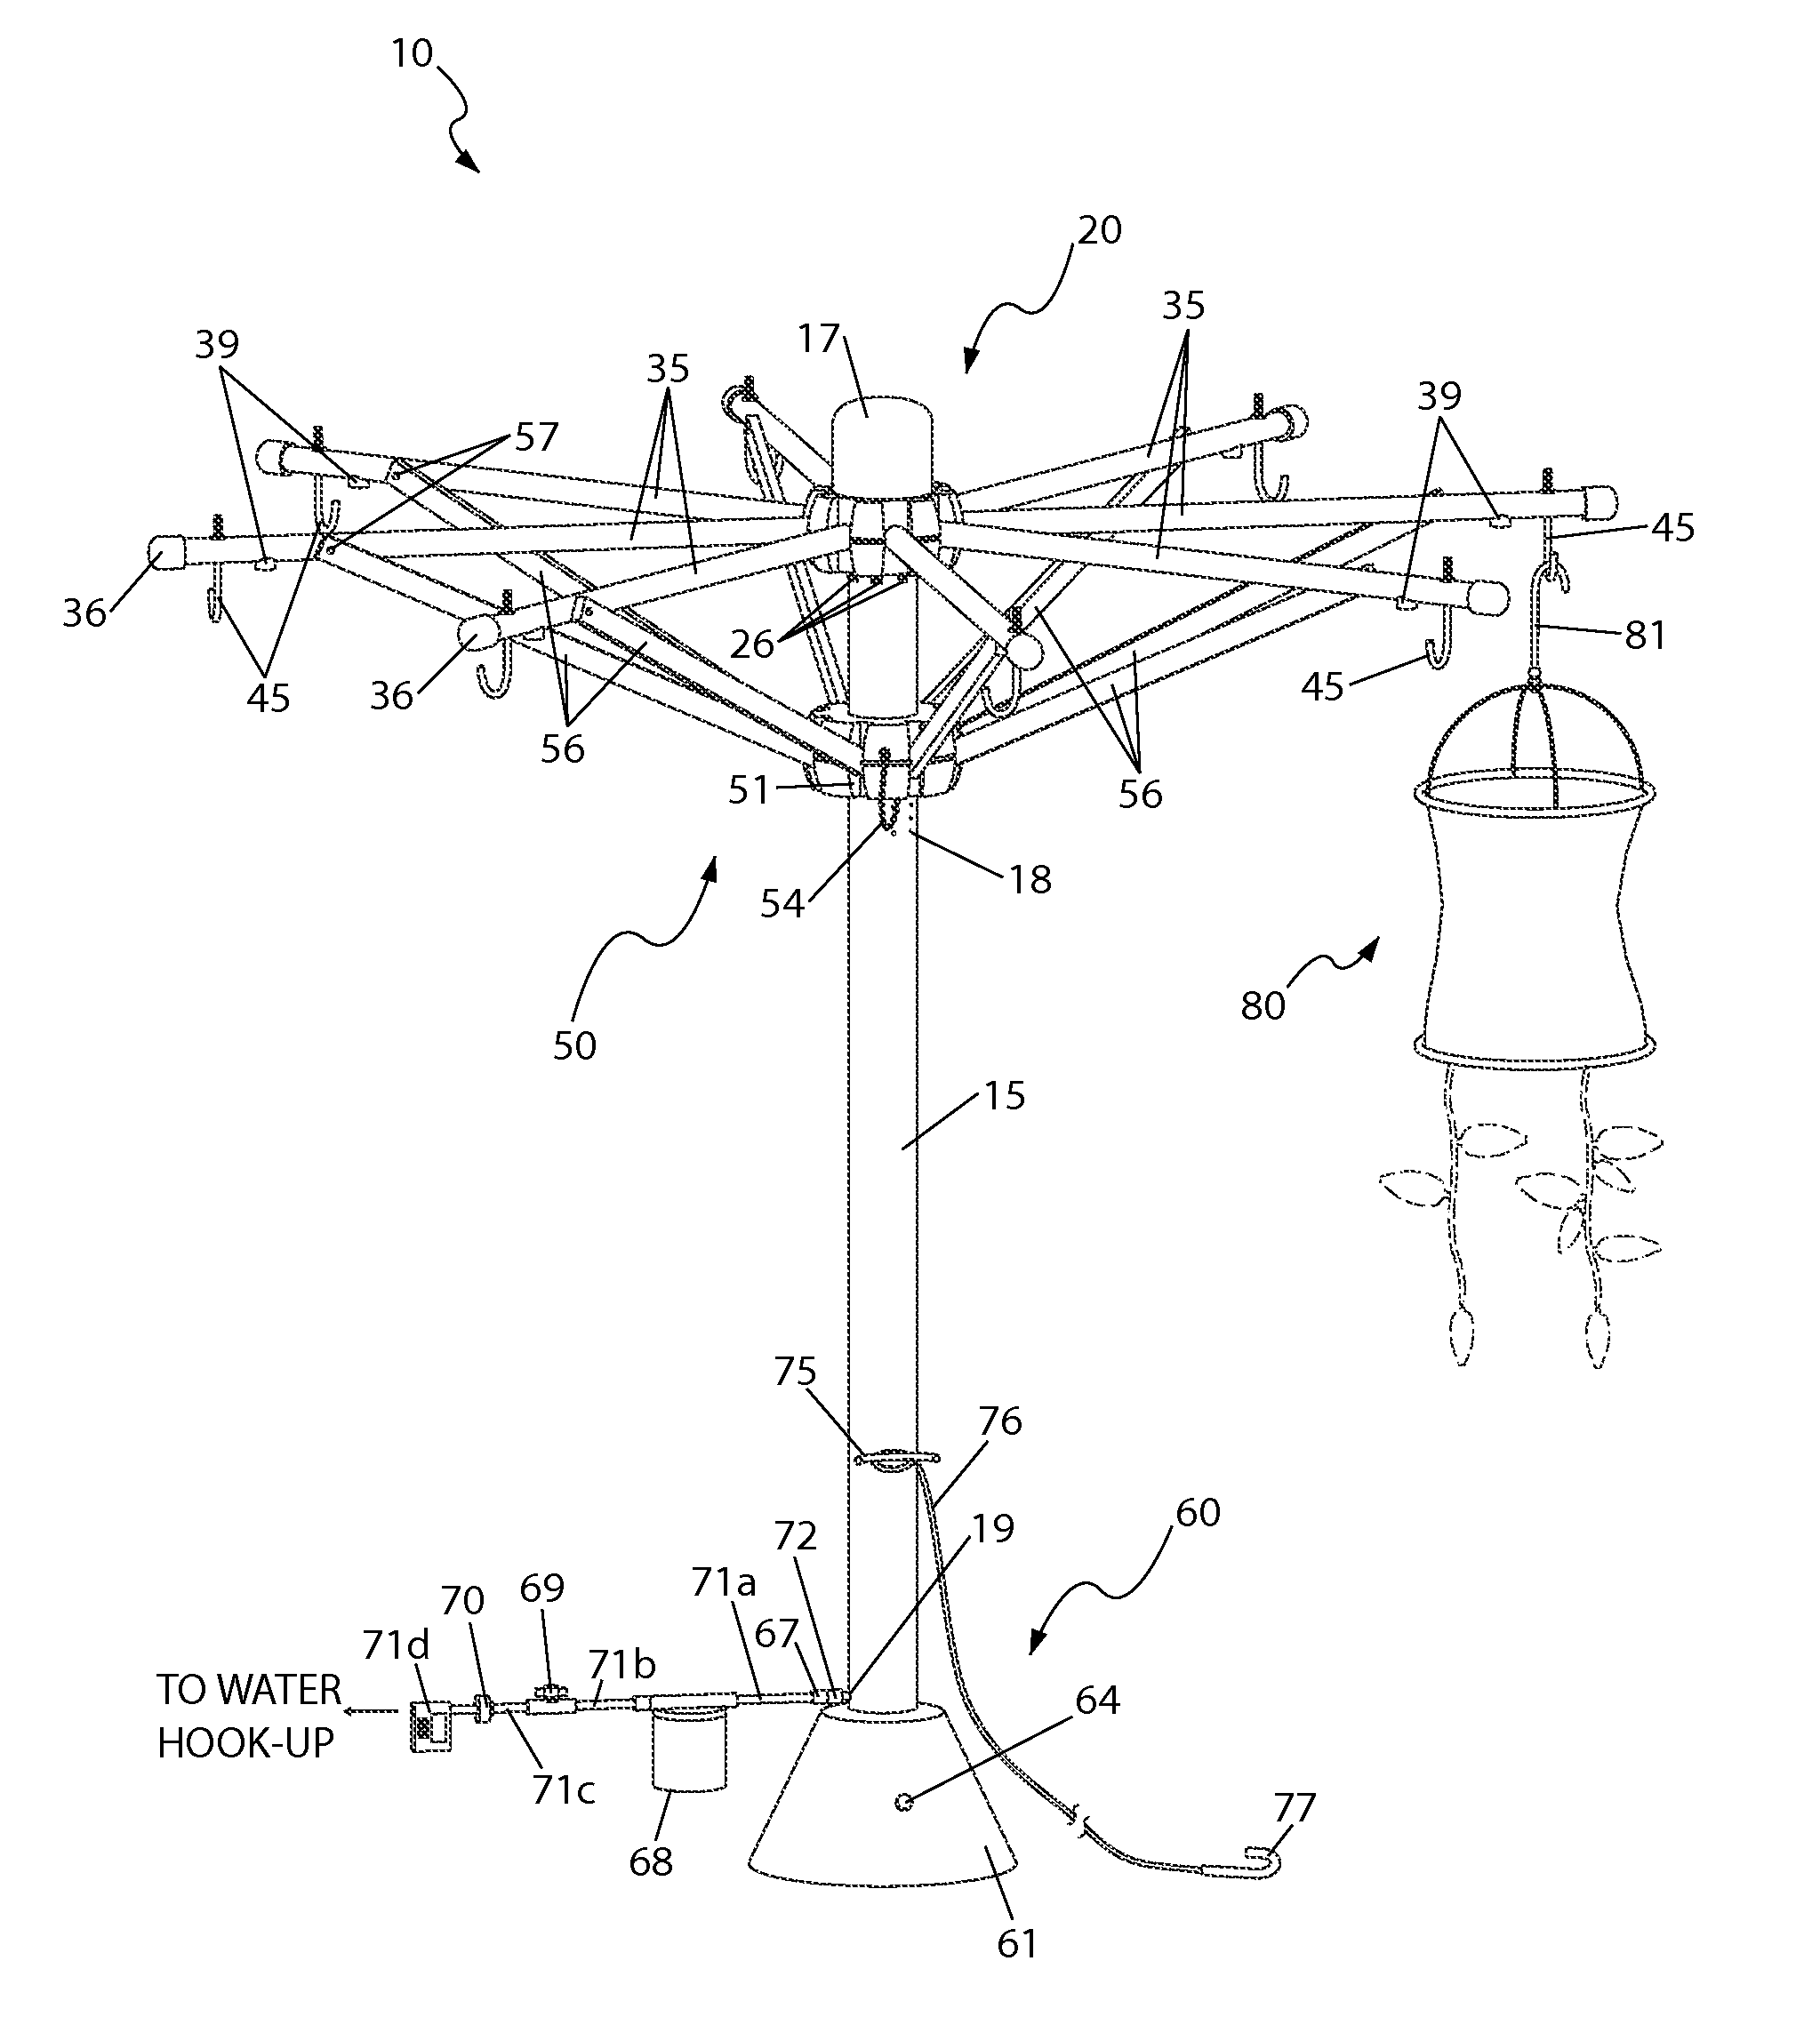 Plant hanger with watering system